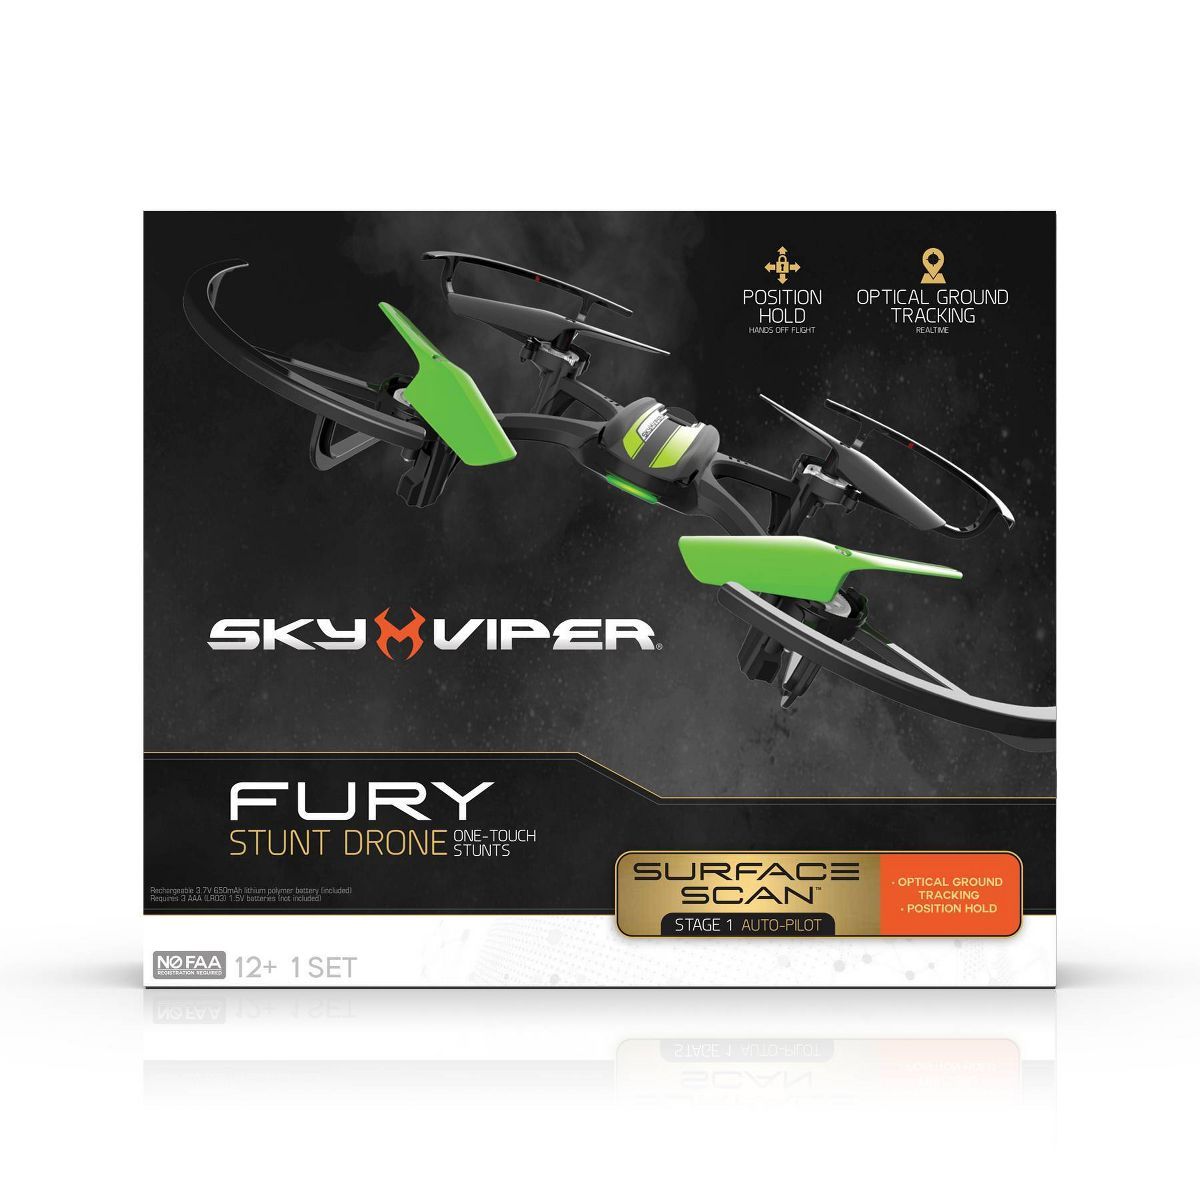 Sky Viper FURY Stunt Drone with Surface Scan | Target